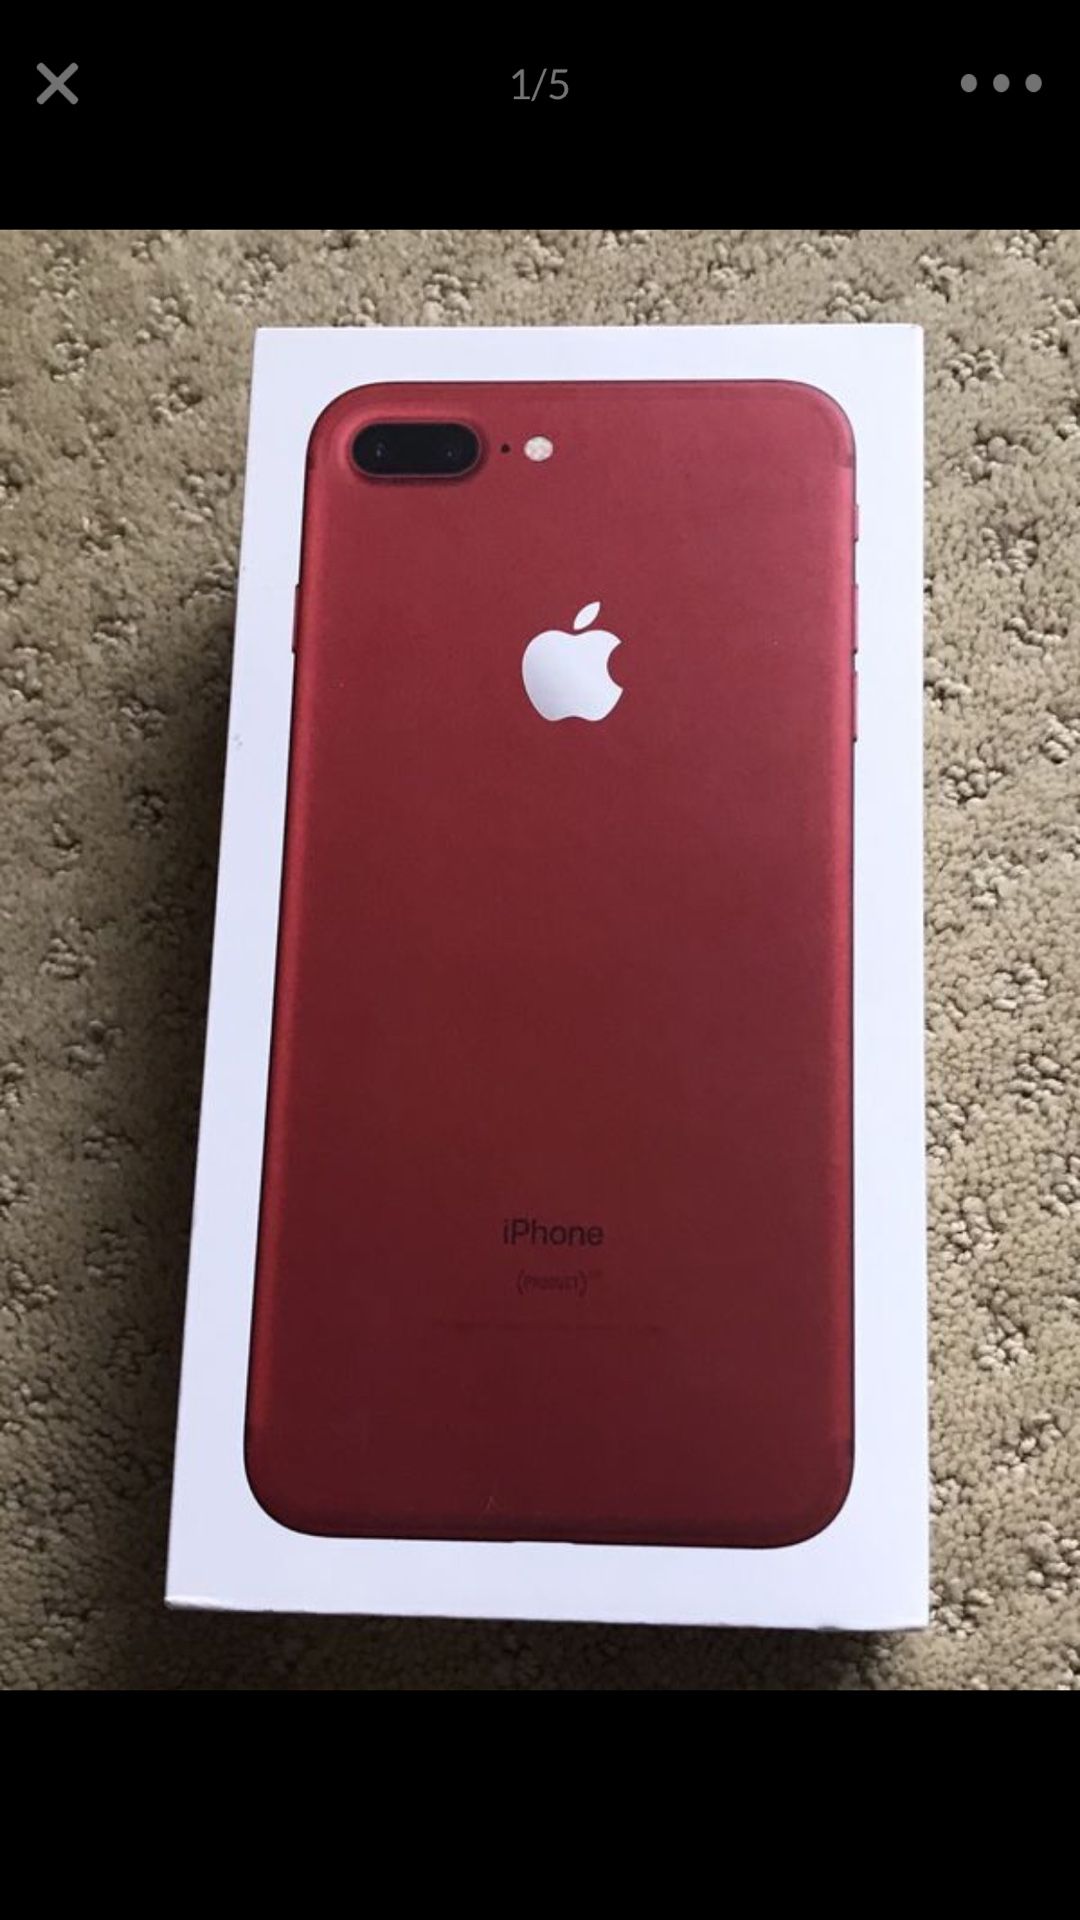 Apple iPhone 7 PLUS - 128GB 5.5” RED Special Edition - UNLOCKED GSM